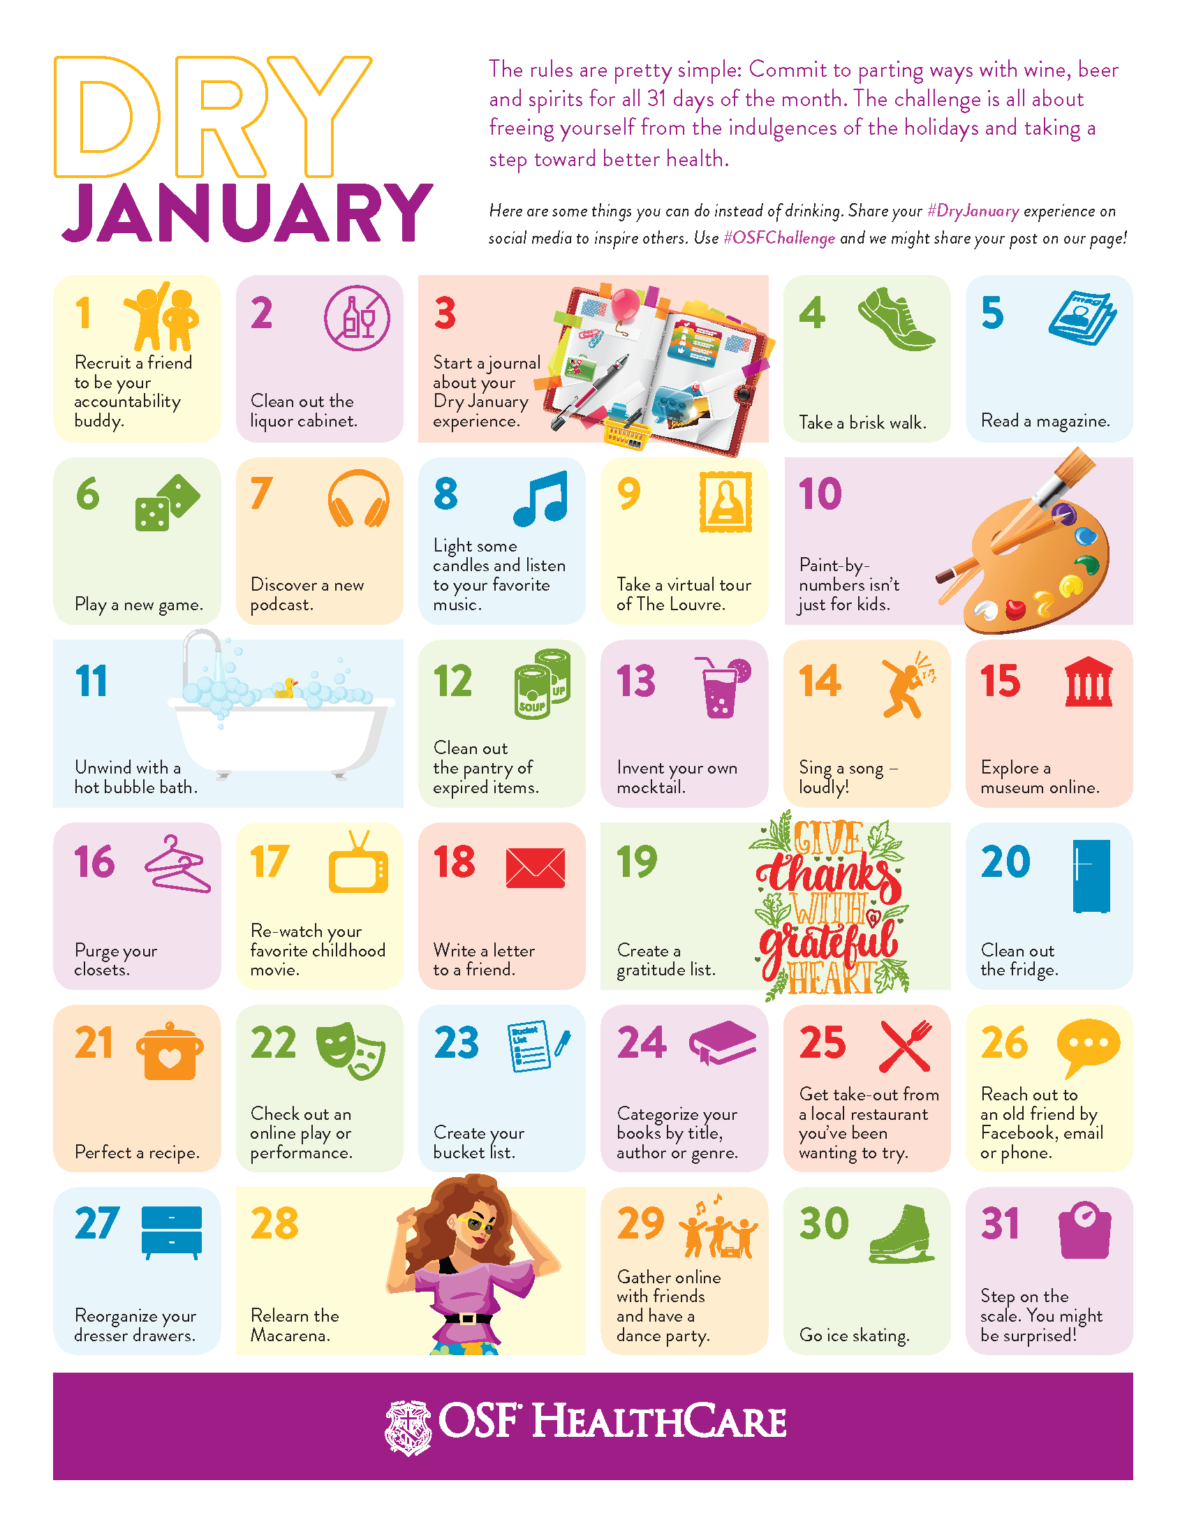 Put down that drink and give ‘Dry January’ a try OSF HealthCare